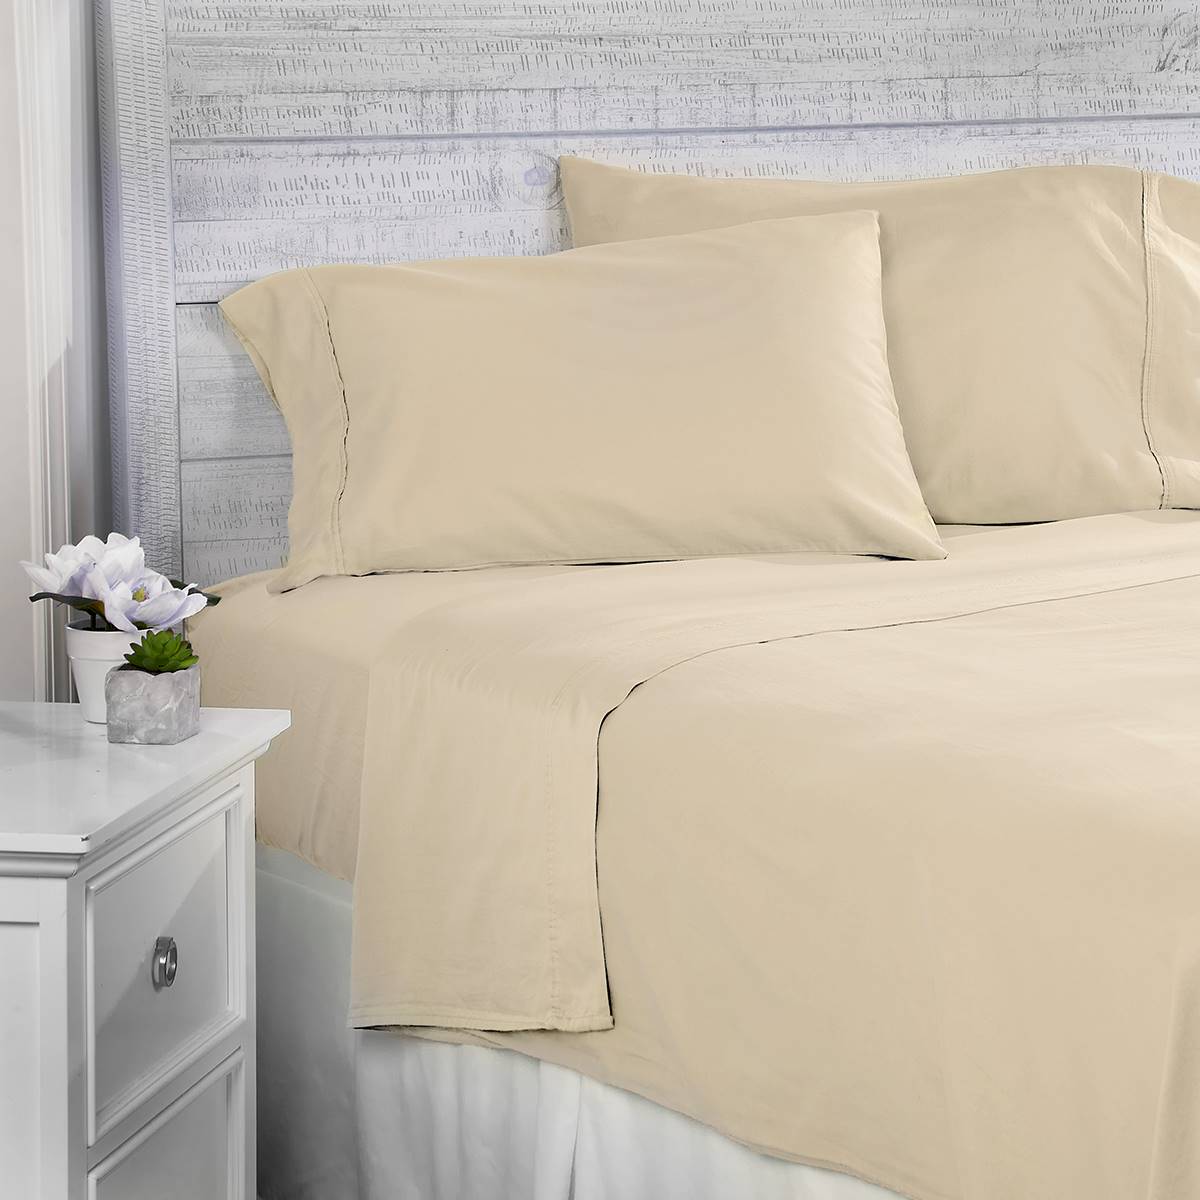 Imperial Living(tm) 400 Thread Count Dobby Solid Sheet Set